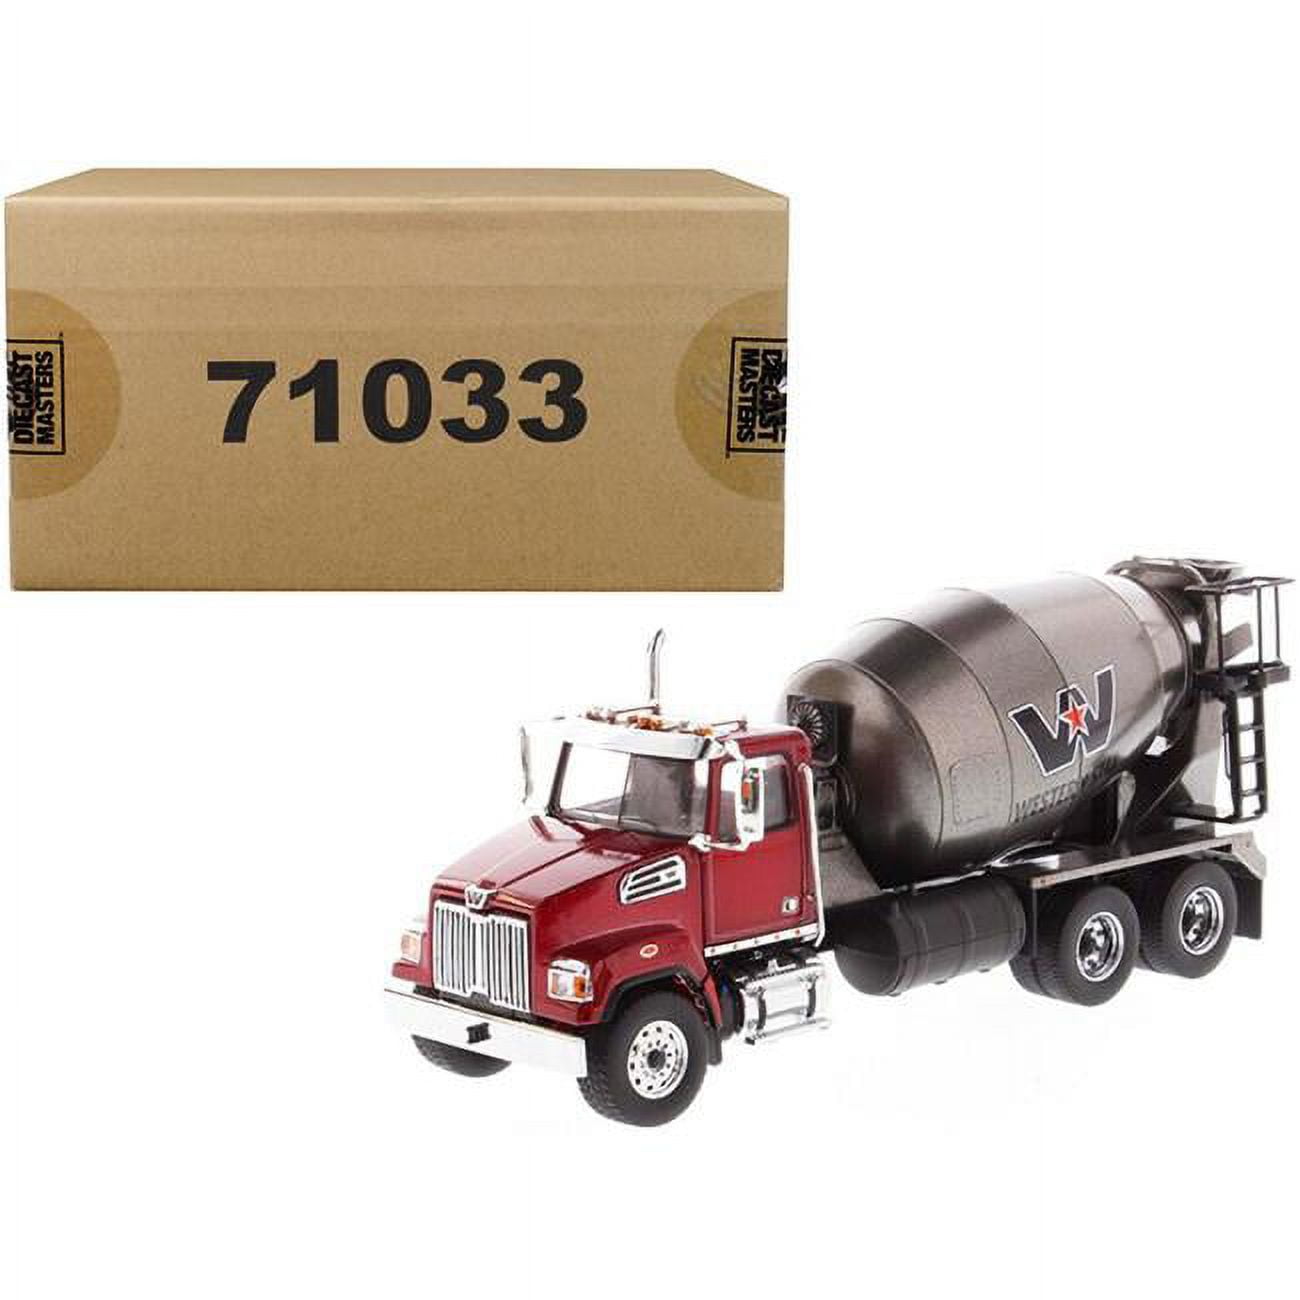 71033 1 By 50 Diecast Scale Concrete Mixer For Western Star 4700 Sf Model, Metallic Red & Silver